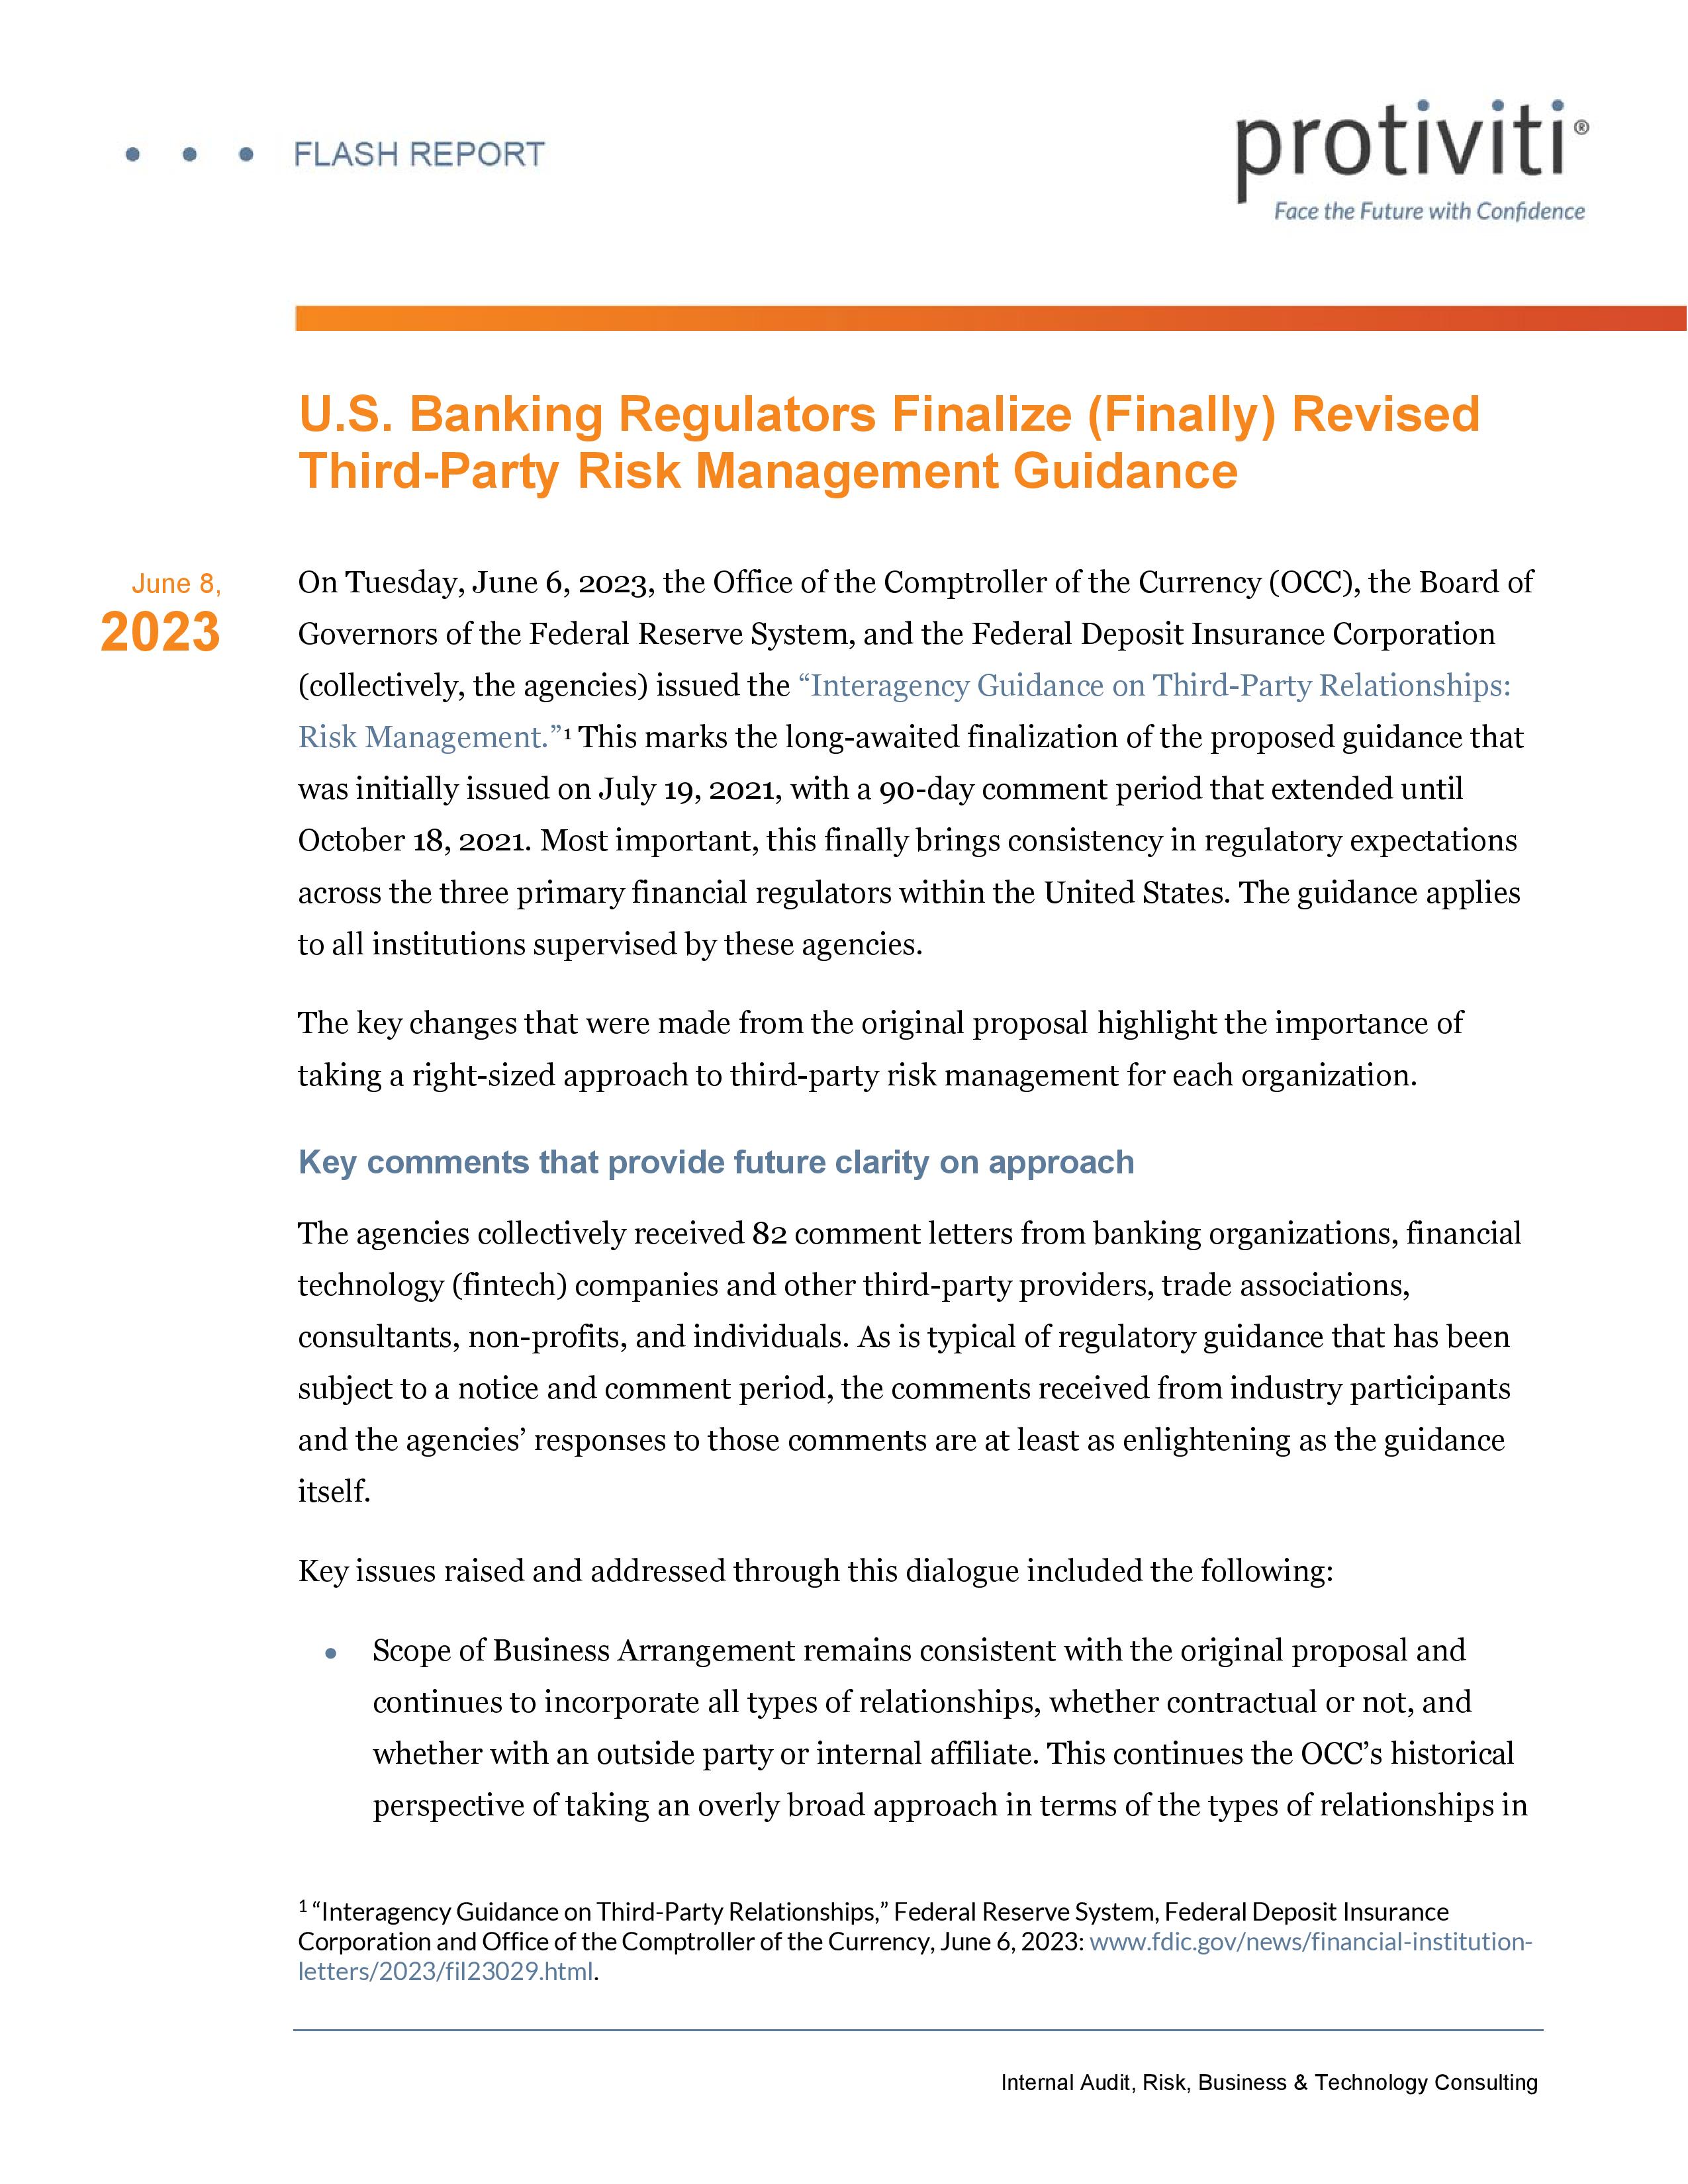 Screenshot of the first page of U.S. Banking Regulators Finalize (Finally) Revised Third-Party Risk Management Guidance